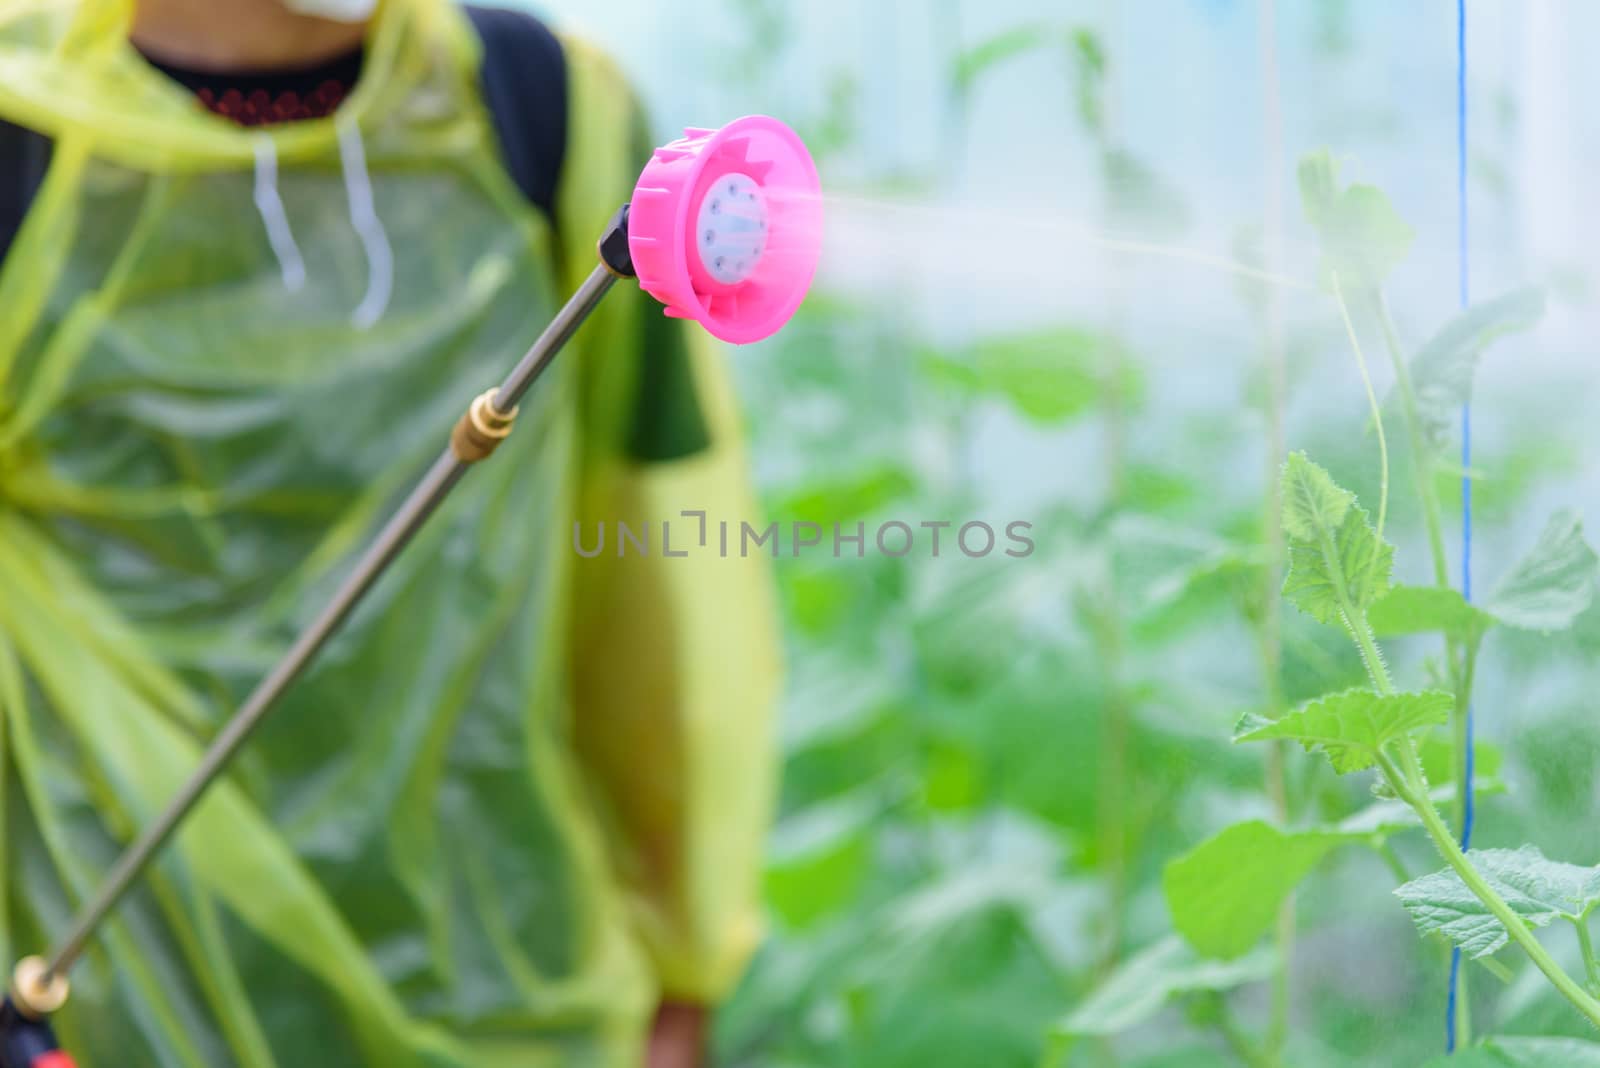 Farmer spraying the Insecticide in melon farm for protect it from insecs by rukawajung